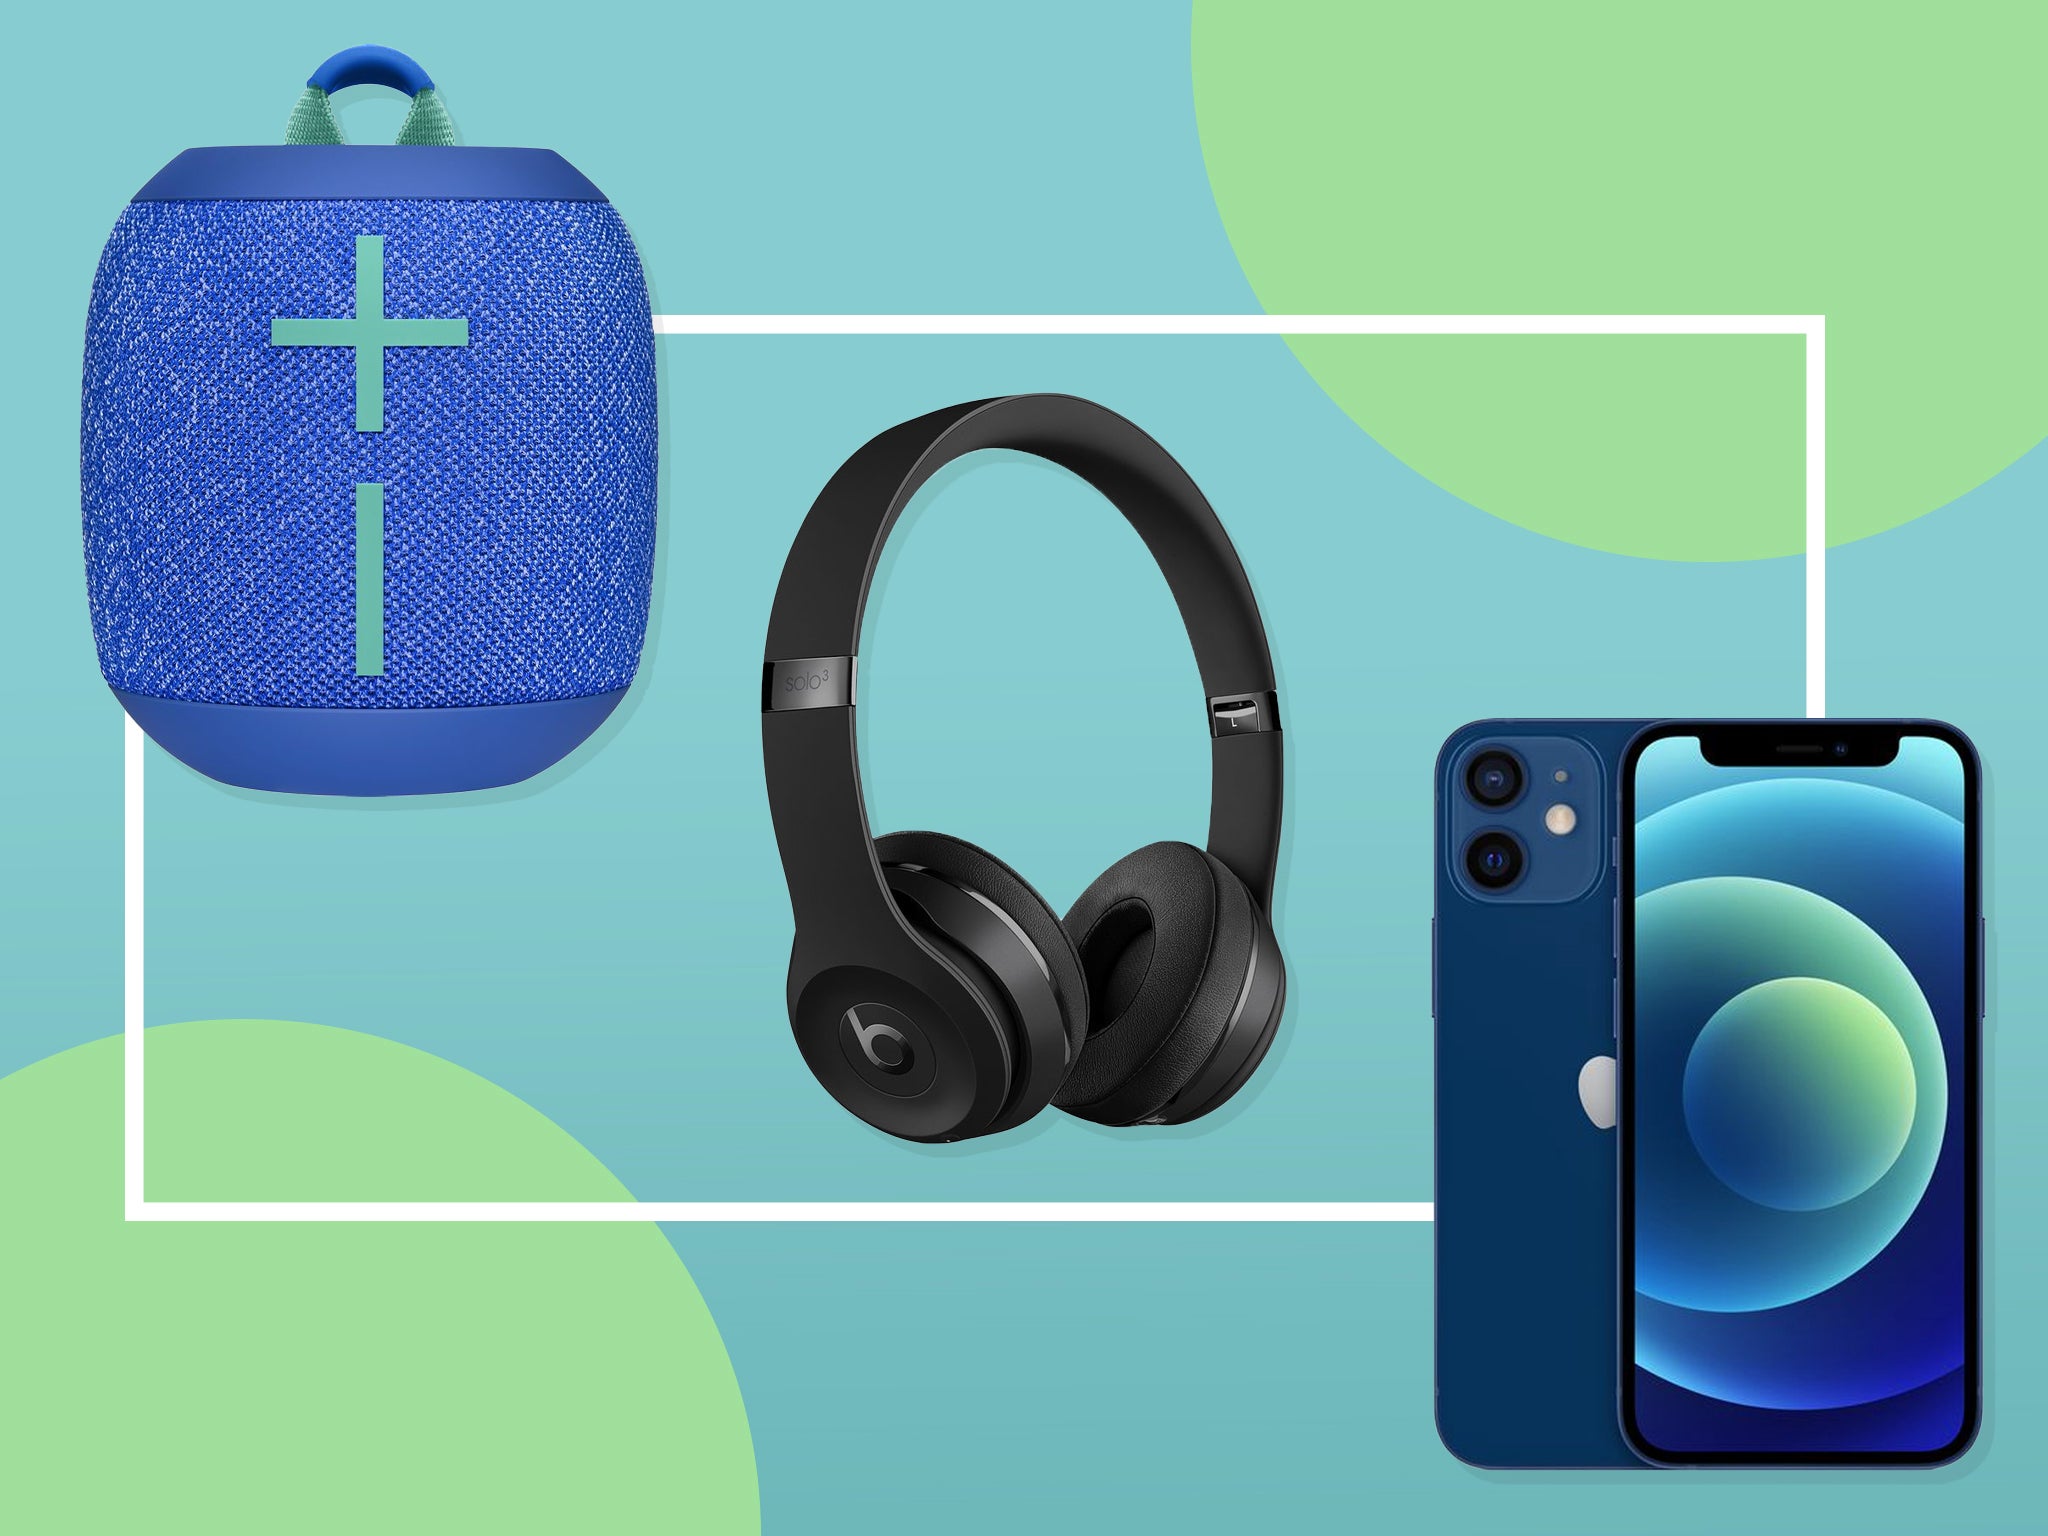 Whether it’s new headphones or a coffee machine, now’s the time nab a bargain